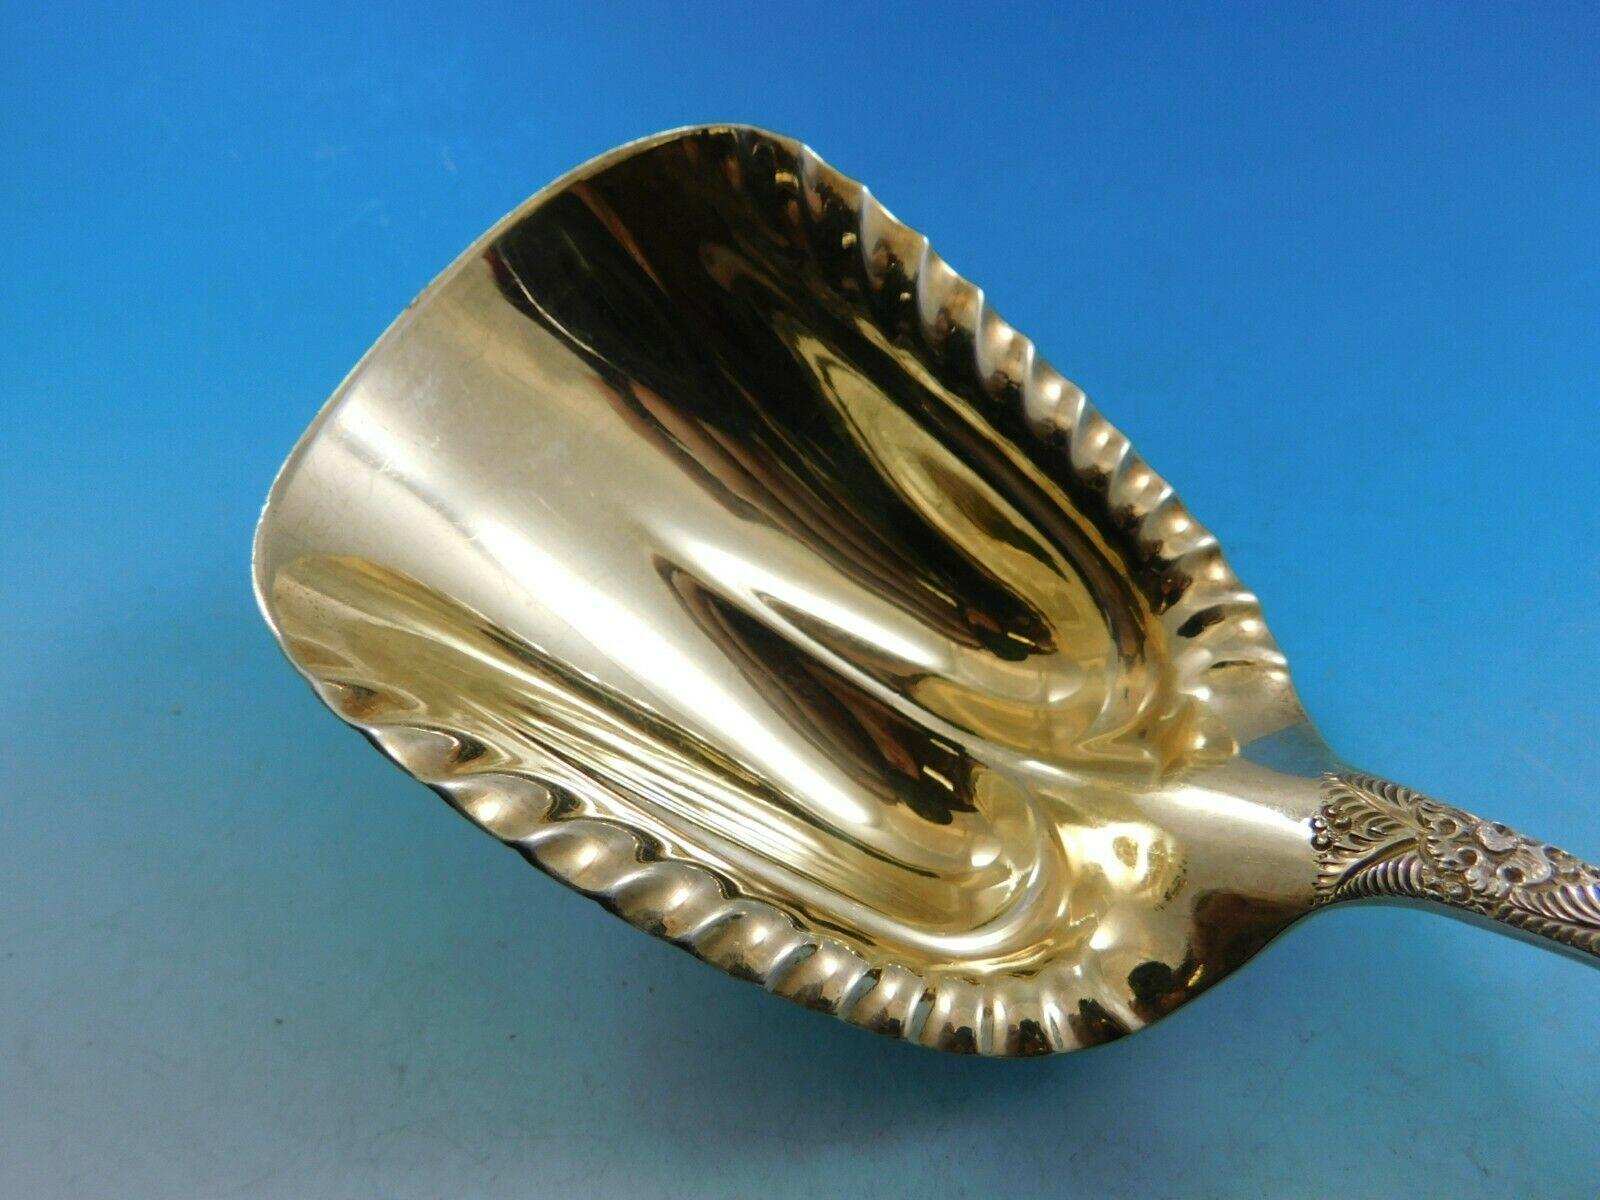 Antique engraved aka custom engraved by Tiffany & Co.

Incredible sterling silver cracker scoop measuring 9 3/8